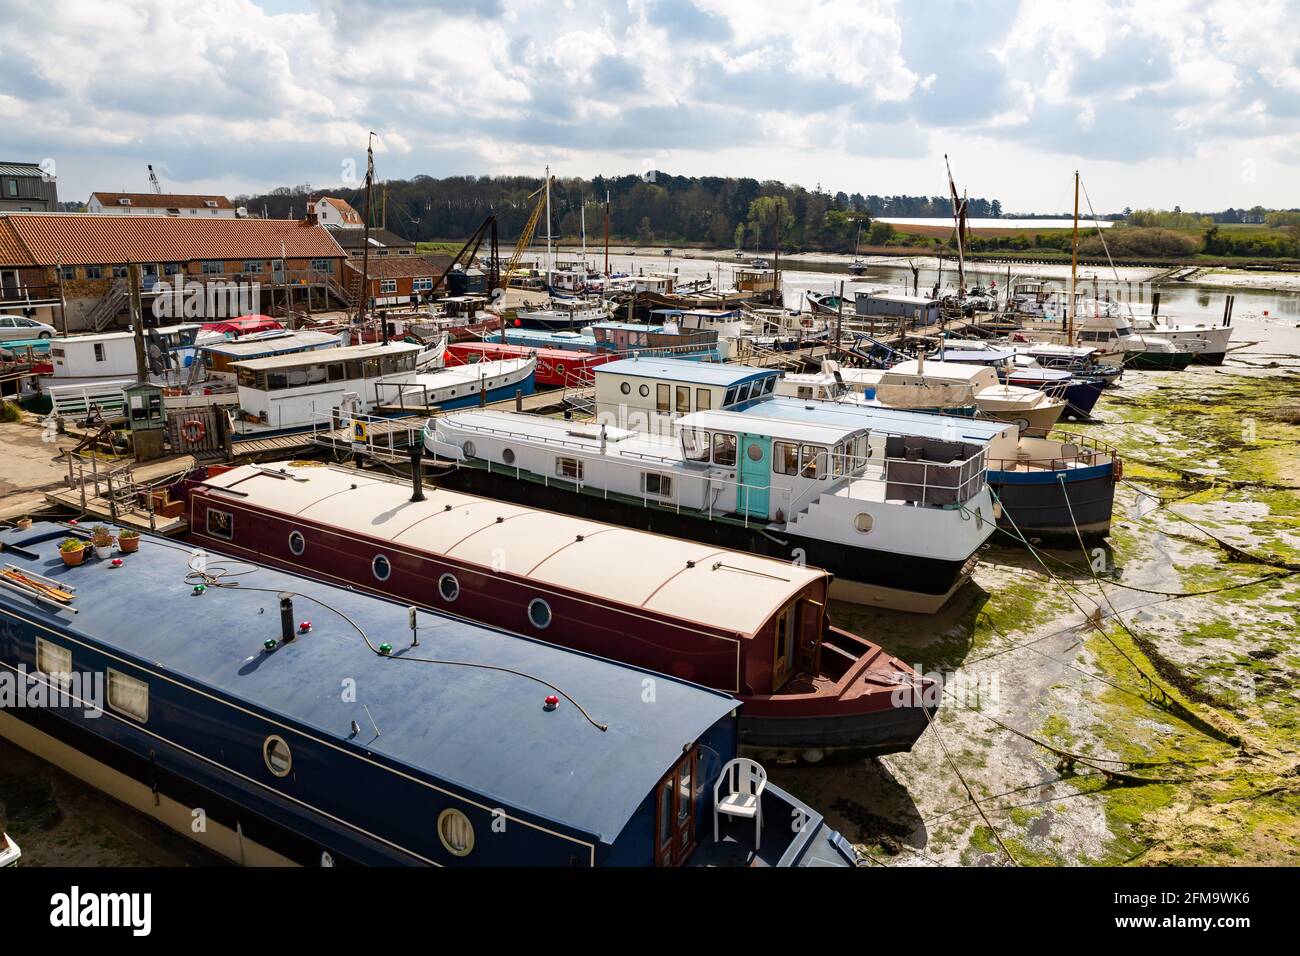 Woodbridge, Suffolk, UK April 30 2021: A grouping of house boats moored up on the River Deben in Suffolk at low tide Stock Photo